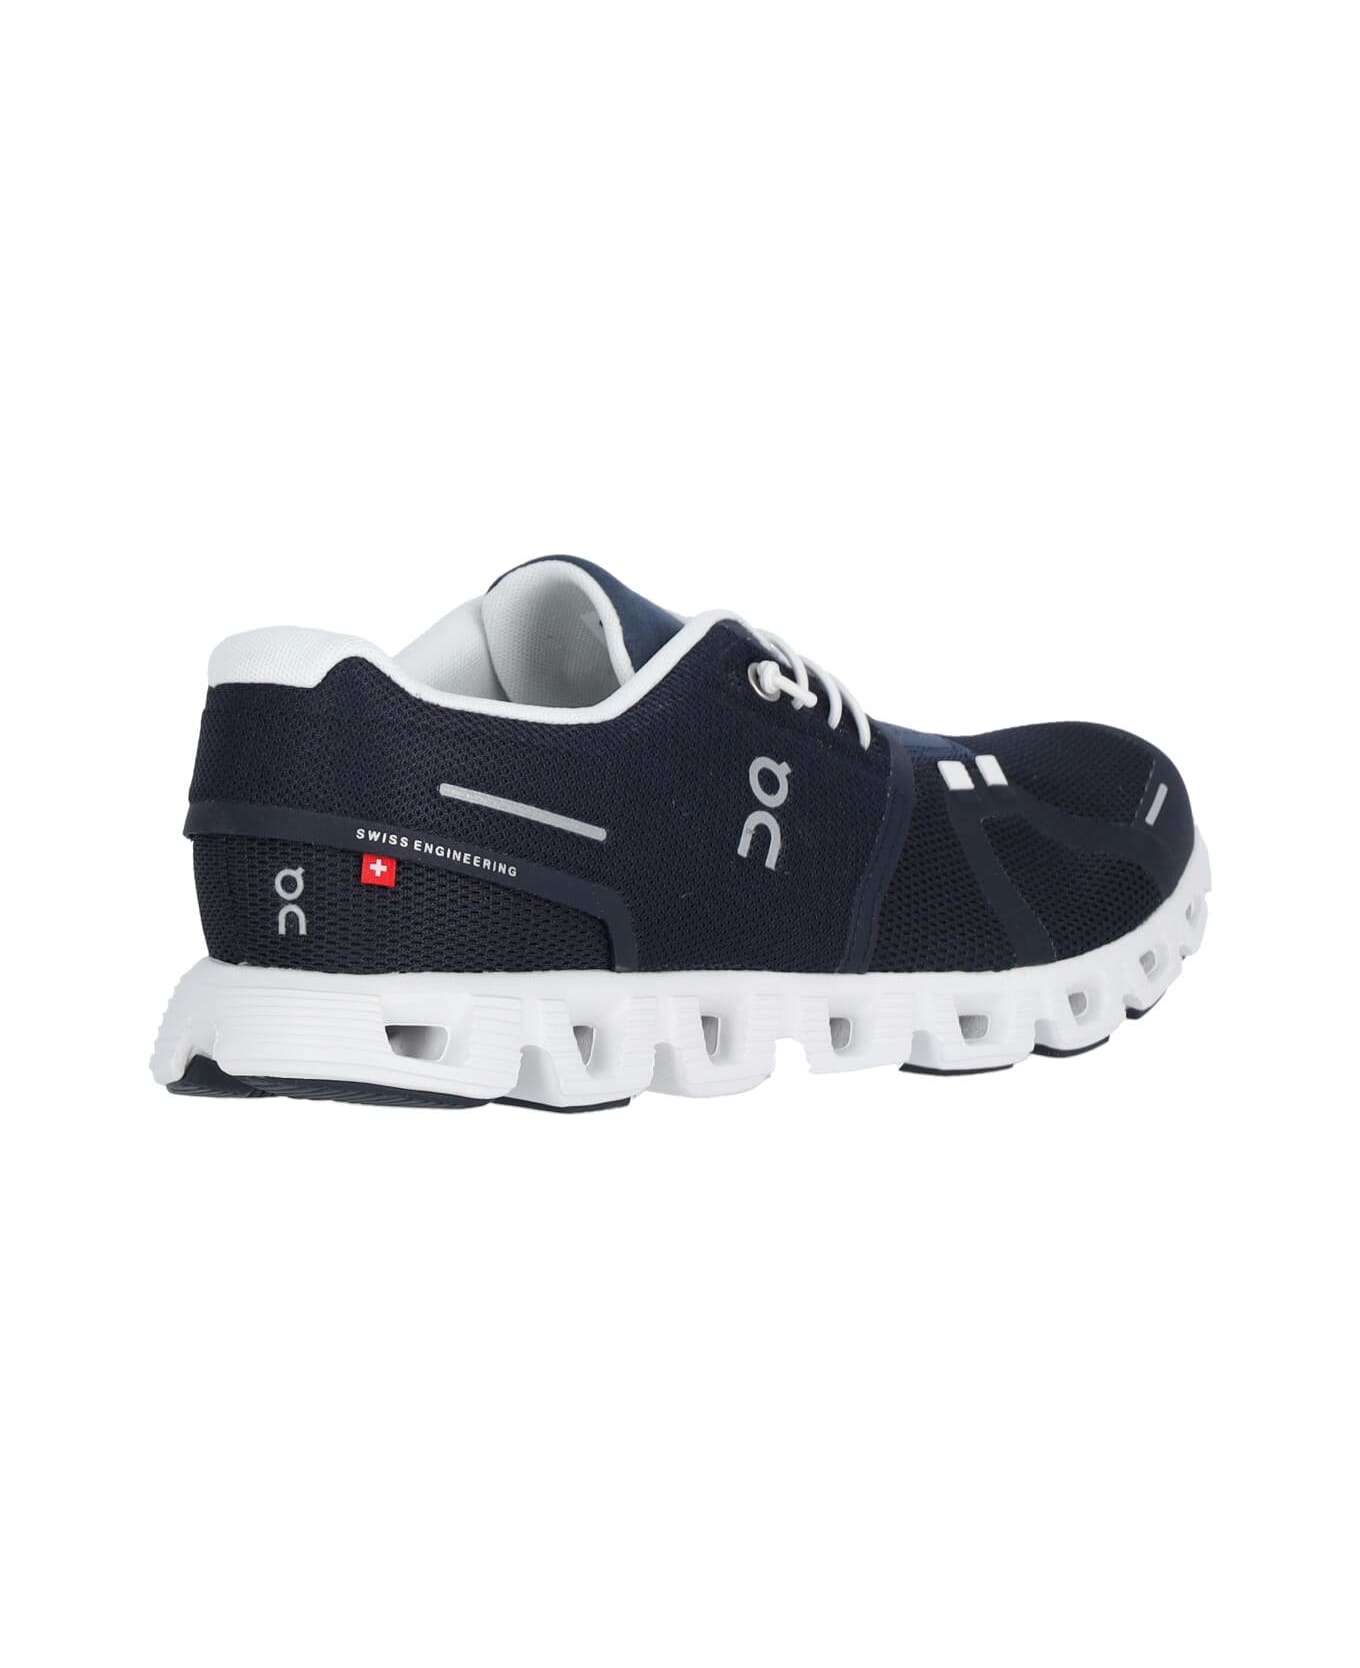 ON 'cloud 5' Sneakers - MIDNIGHT WHITE